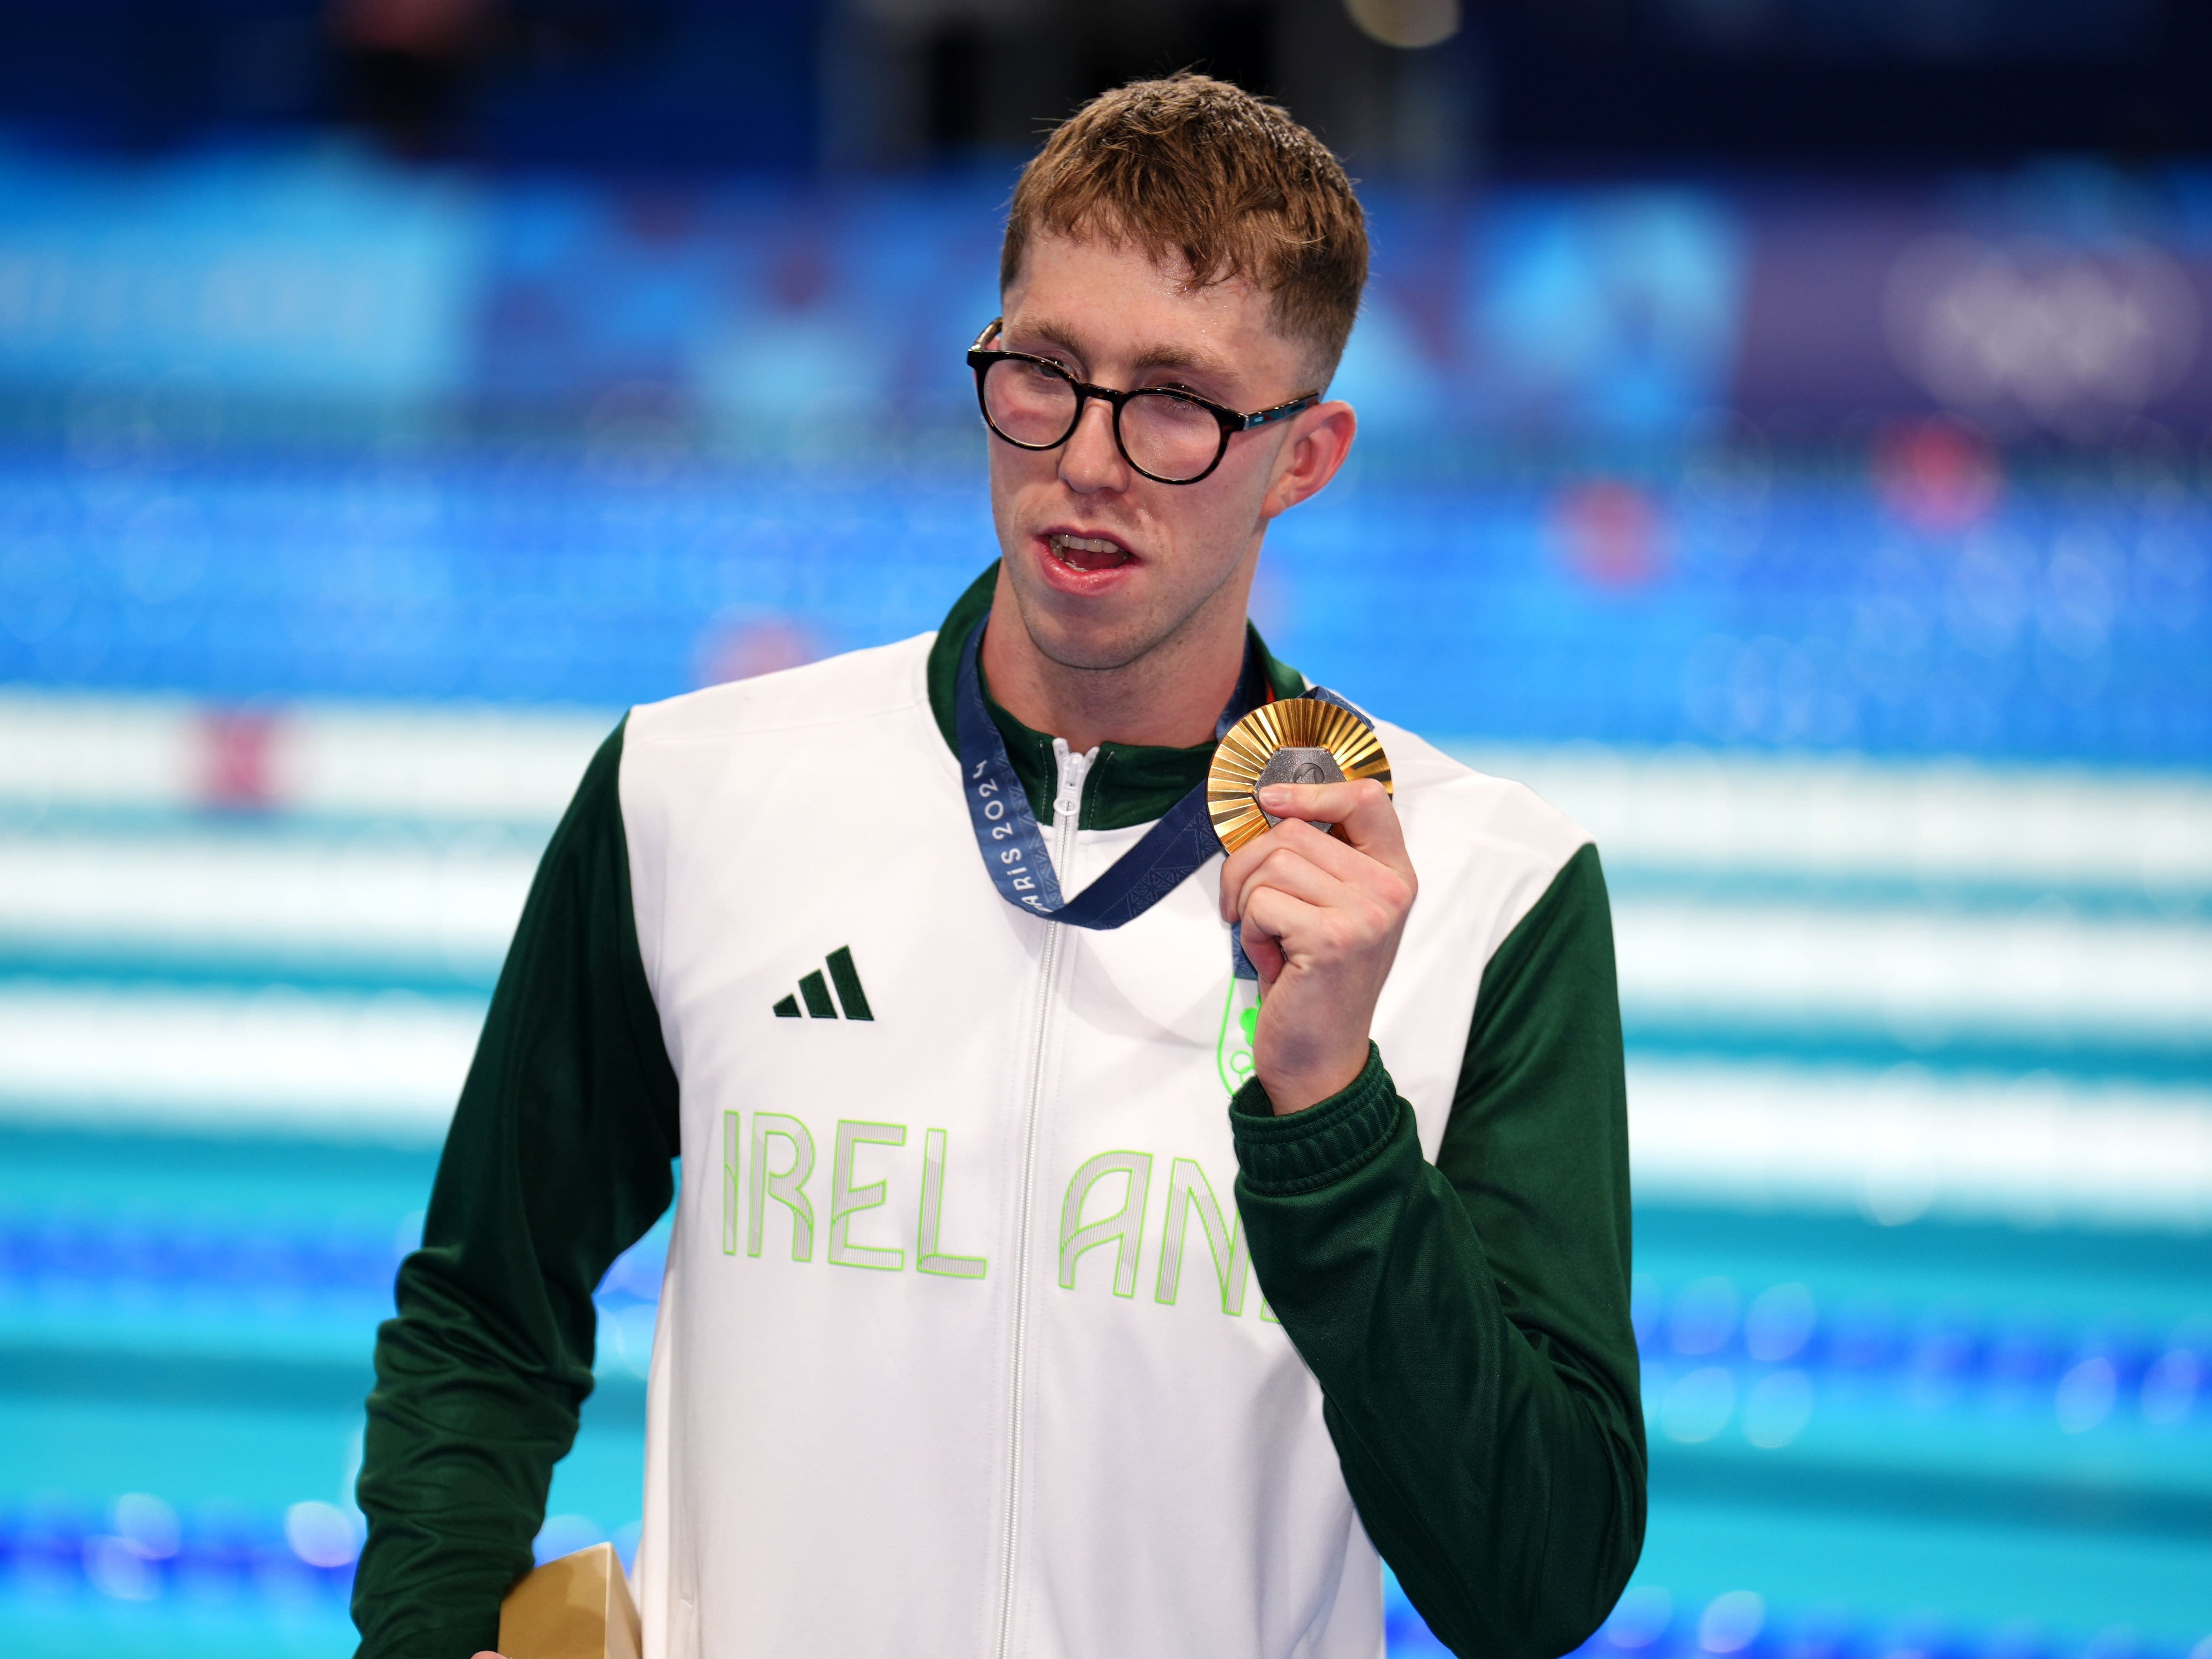 Daniel Wiffen claims stunning gold medal win for Ireland in men’s 800m freestyle